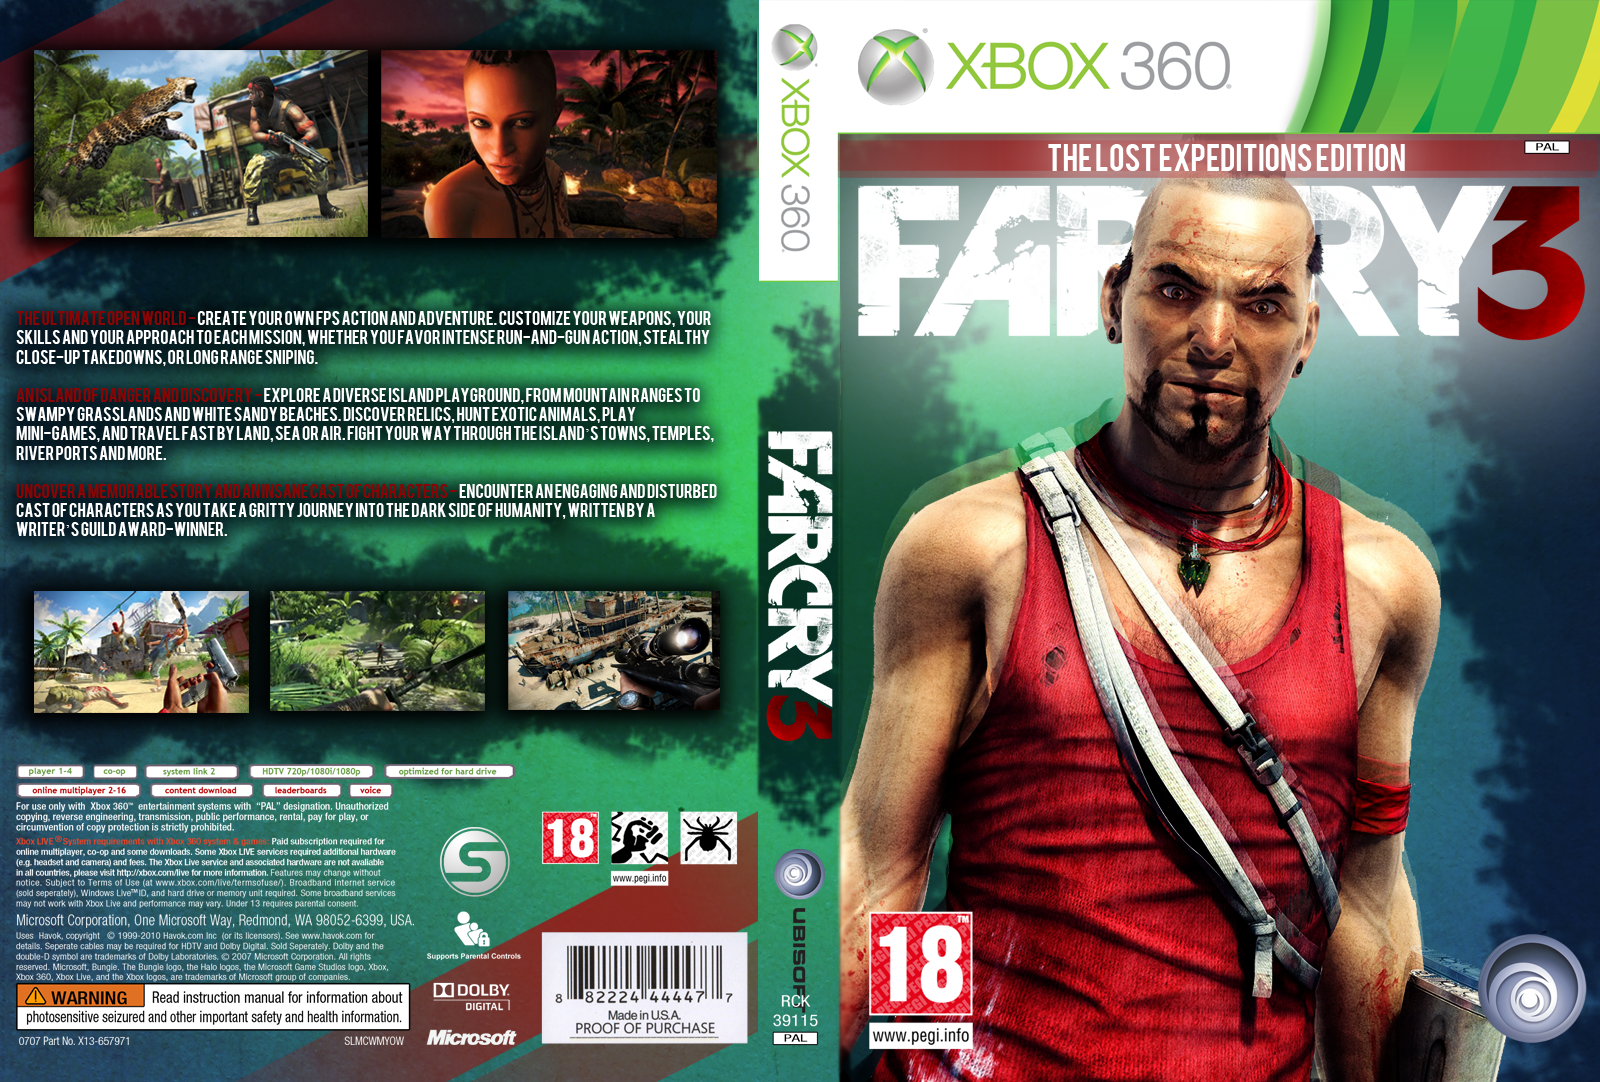 far cry 1 for xbox 360